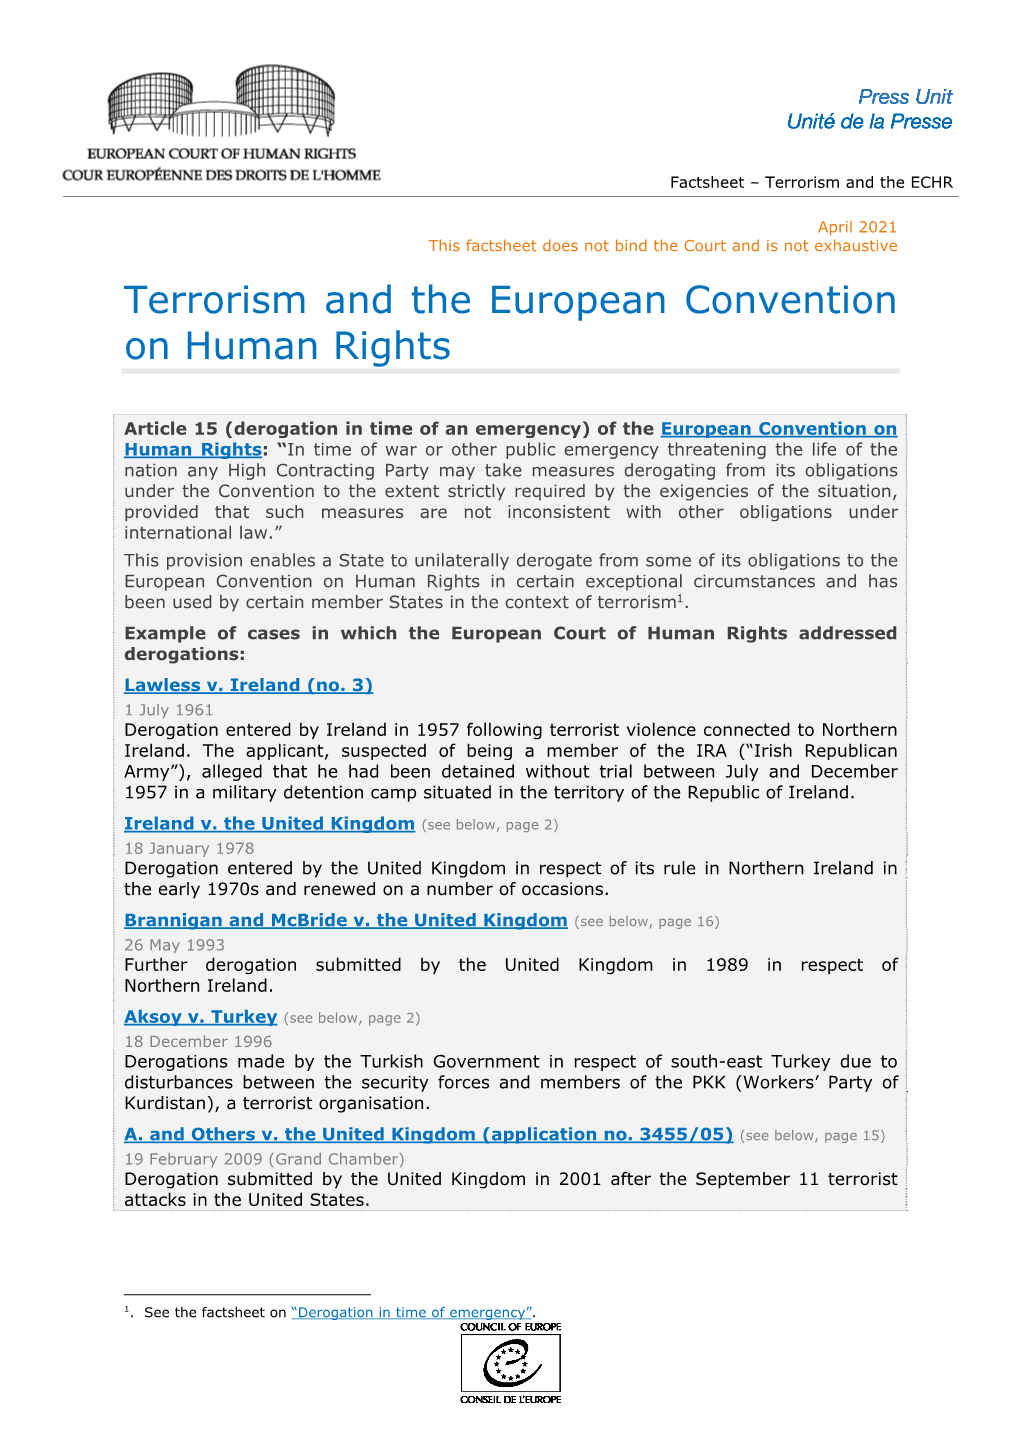 Terrorism and the ECHR